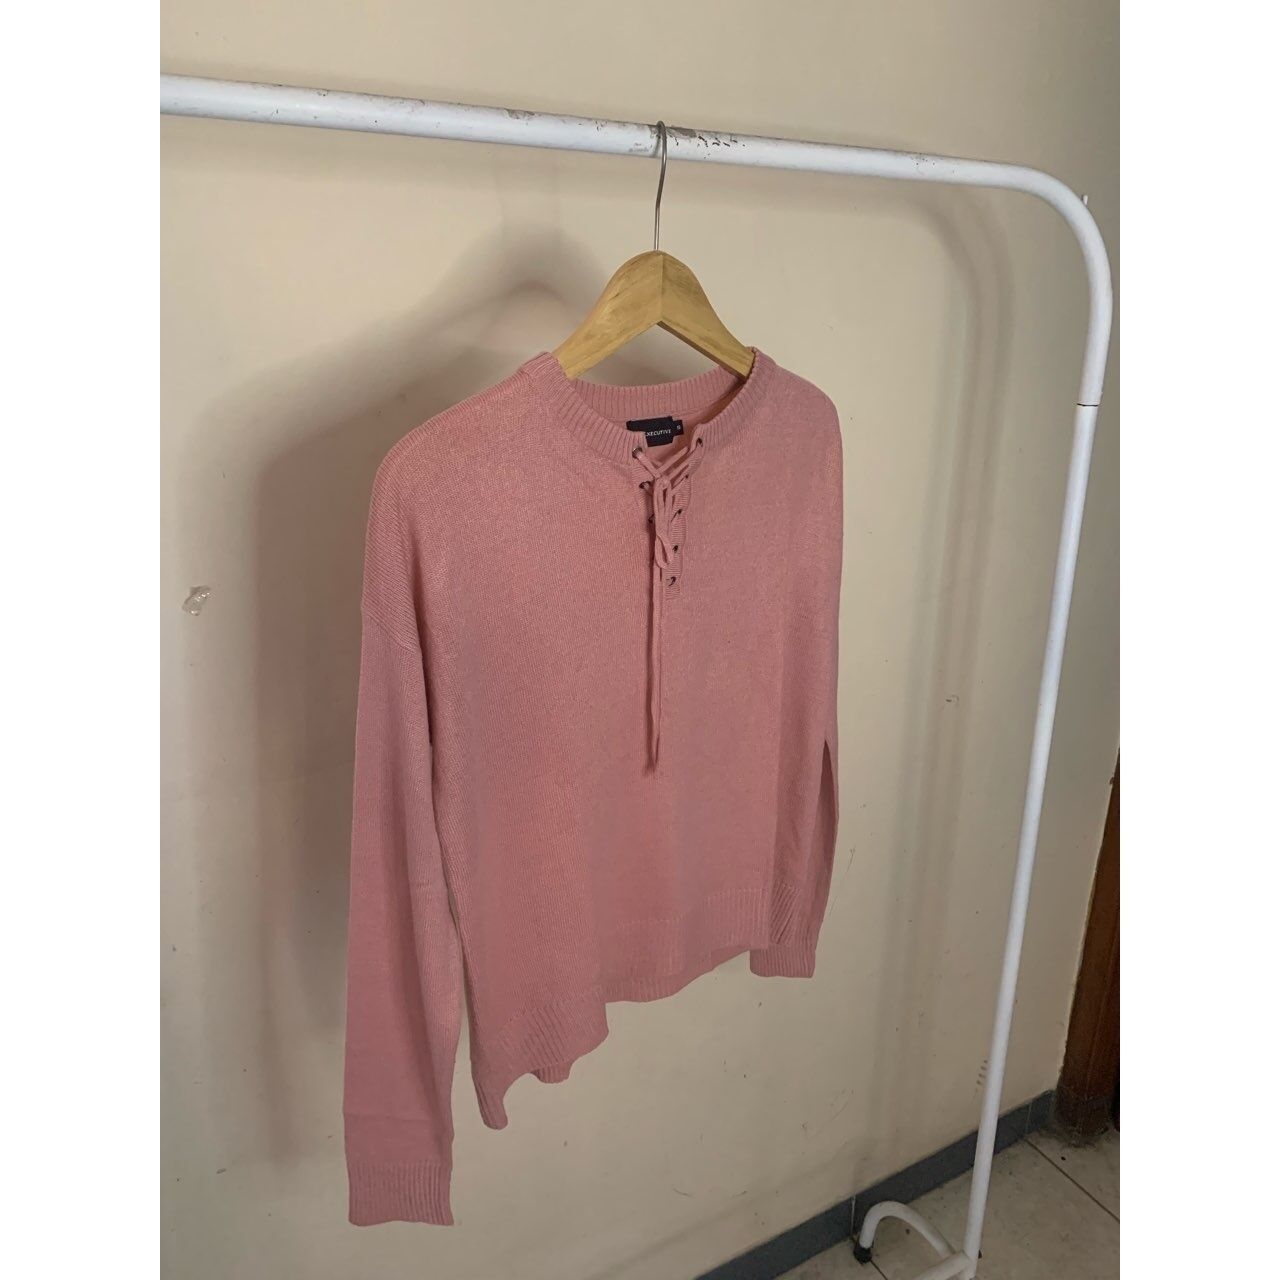 The Executive Pink Sweater